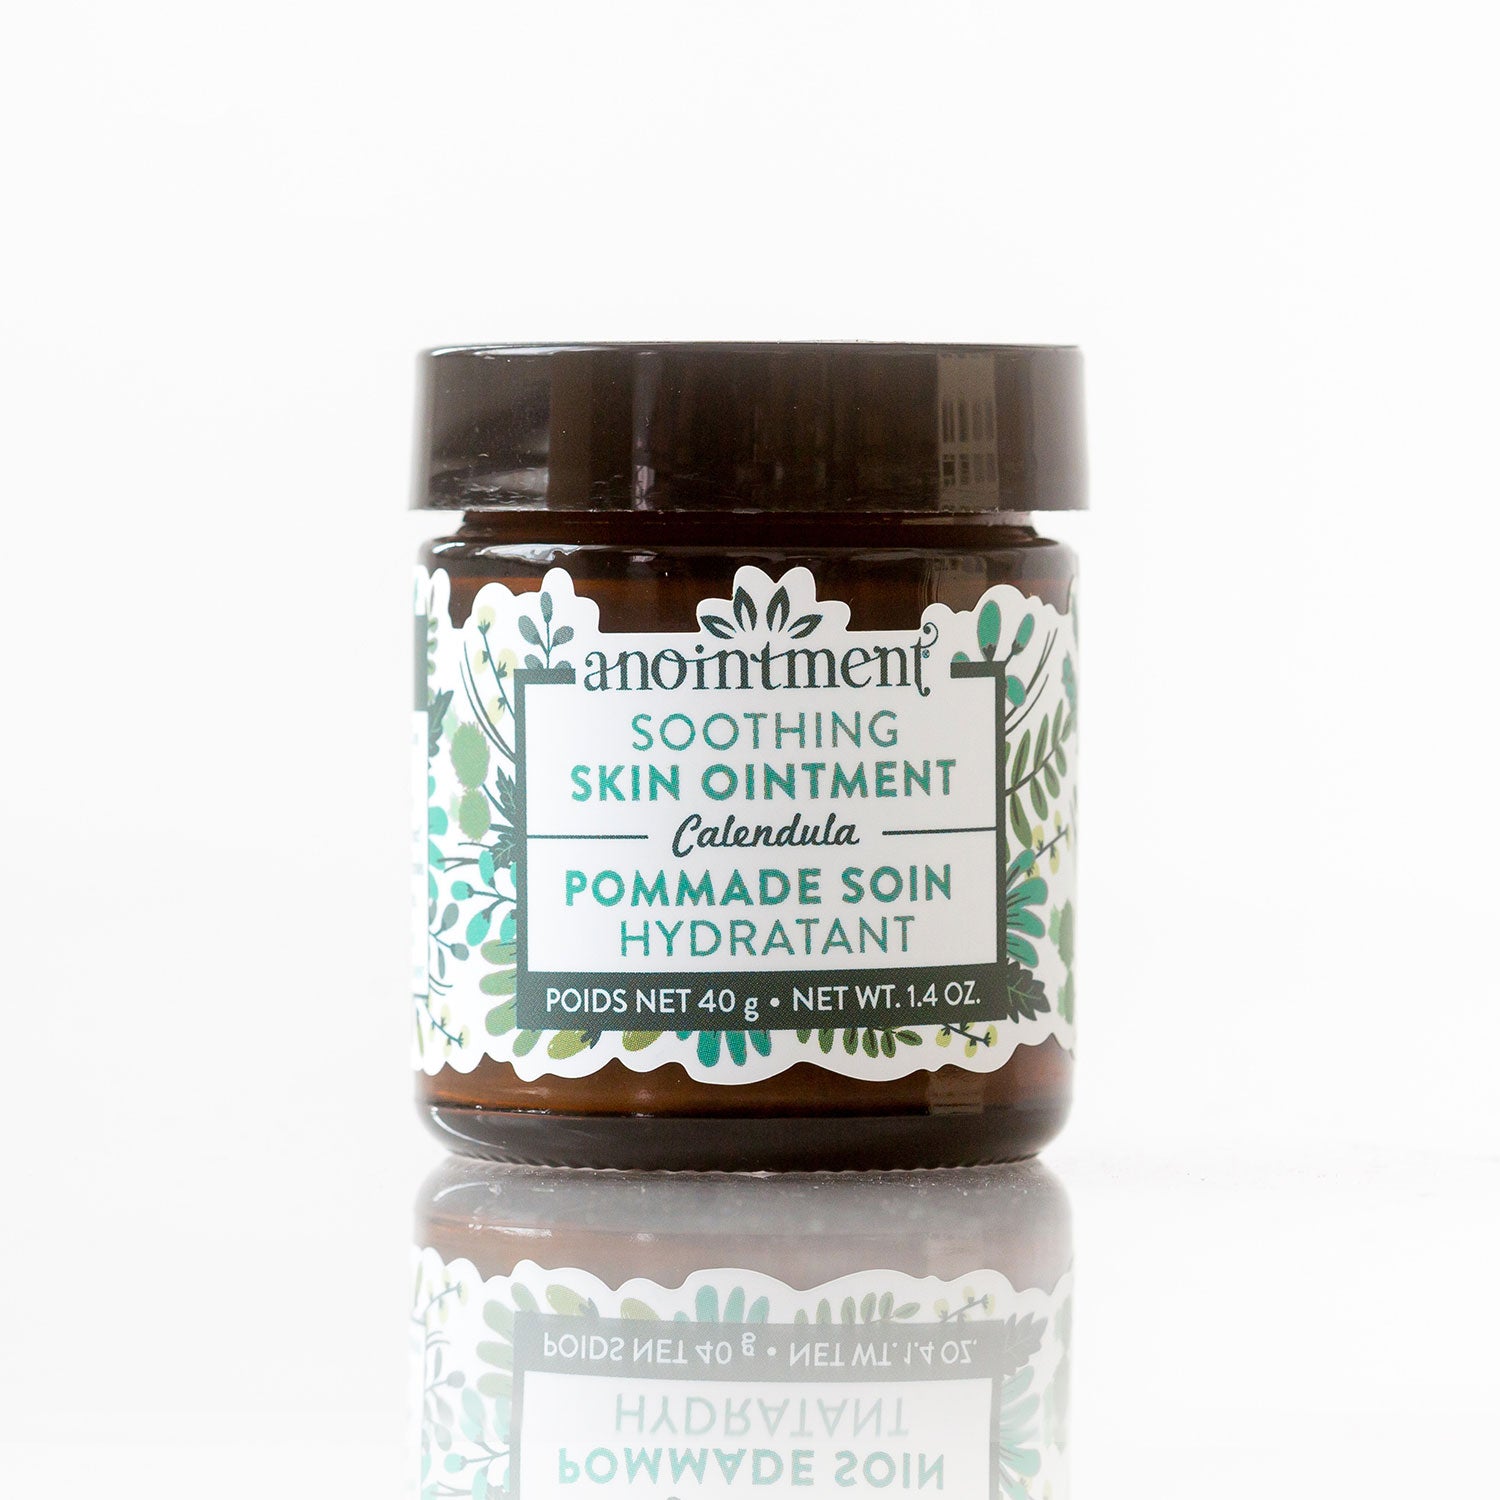 Anointment - Soothing Skin Ointment